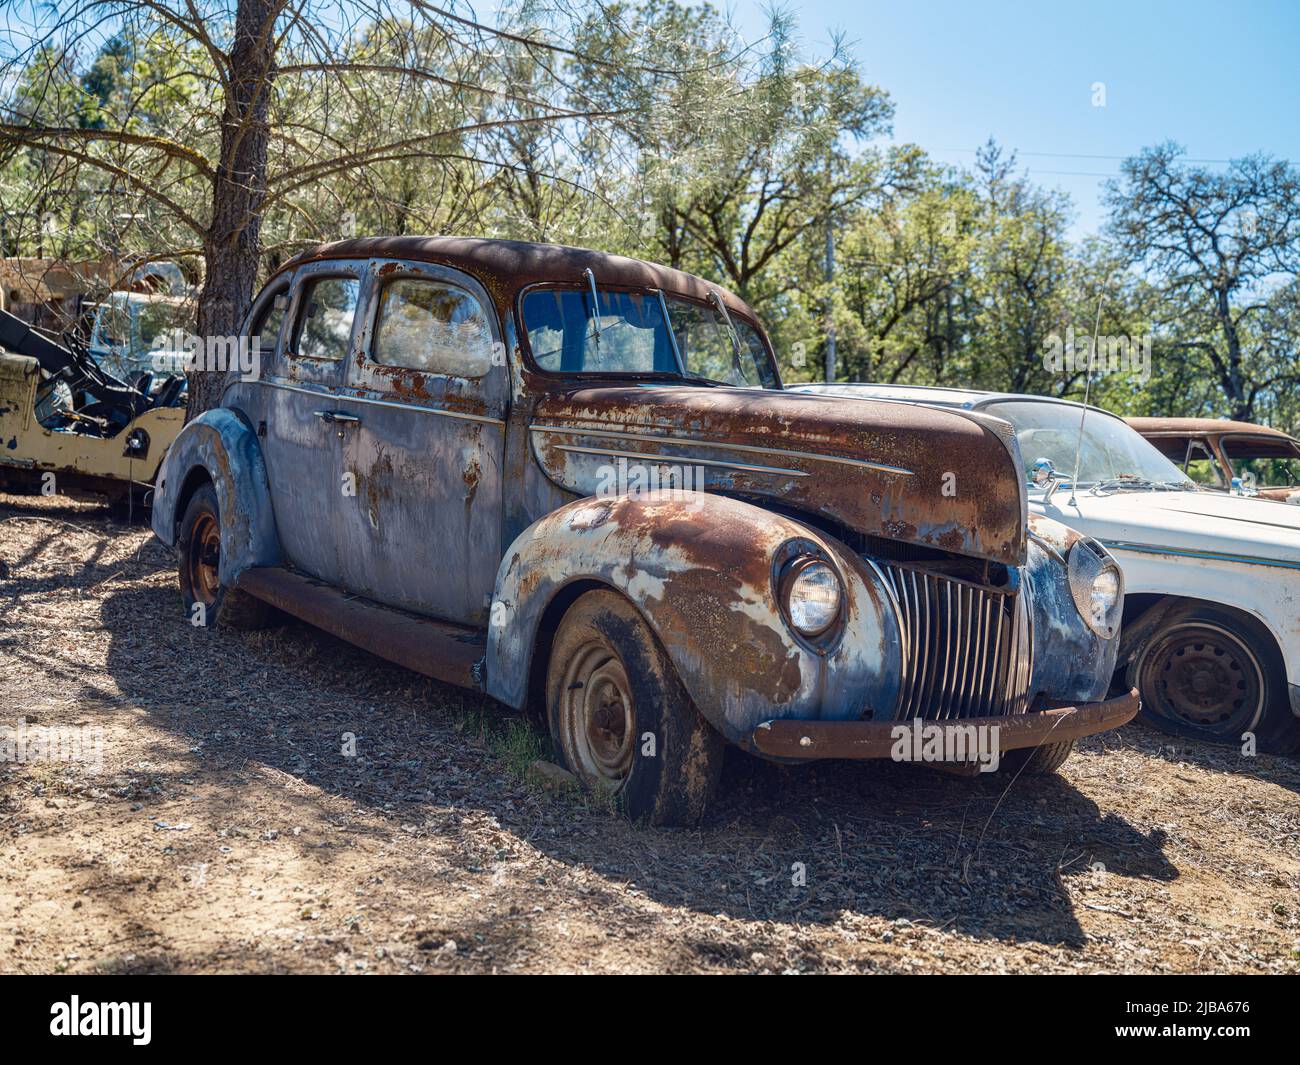 In 1903 there were 4000 cars in America, these days in 2022 we have 287 million and rising. Here we have an old beautiful dilapidated retired rusty ca Stock Photo